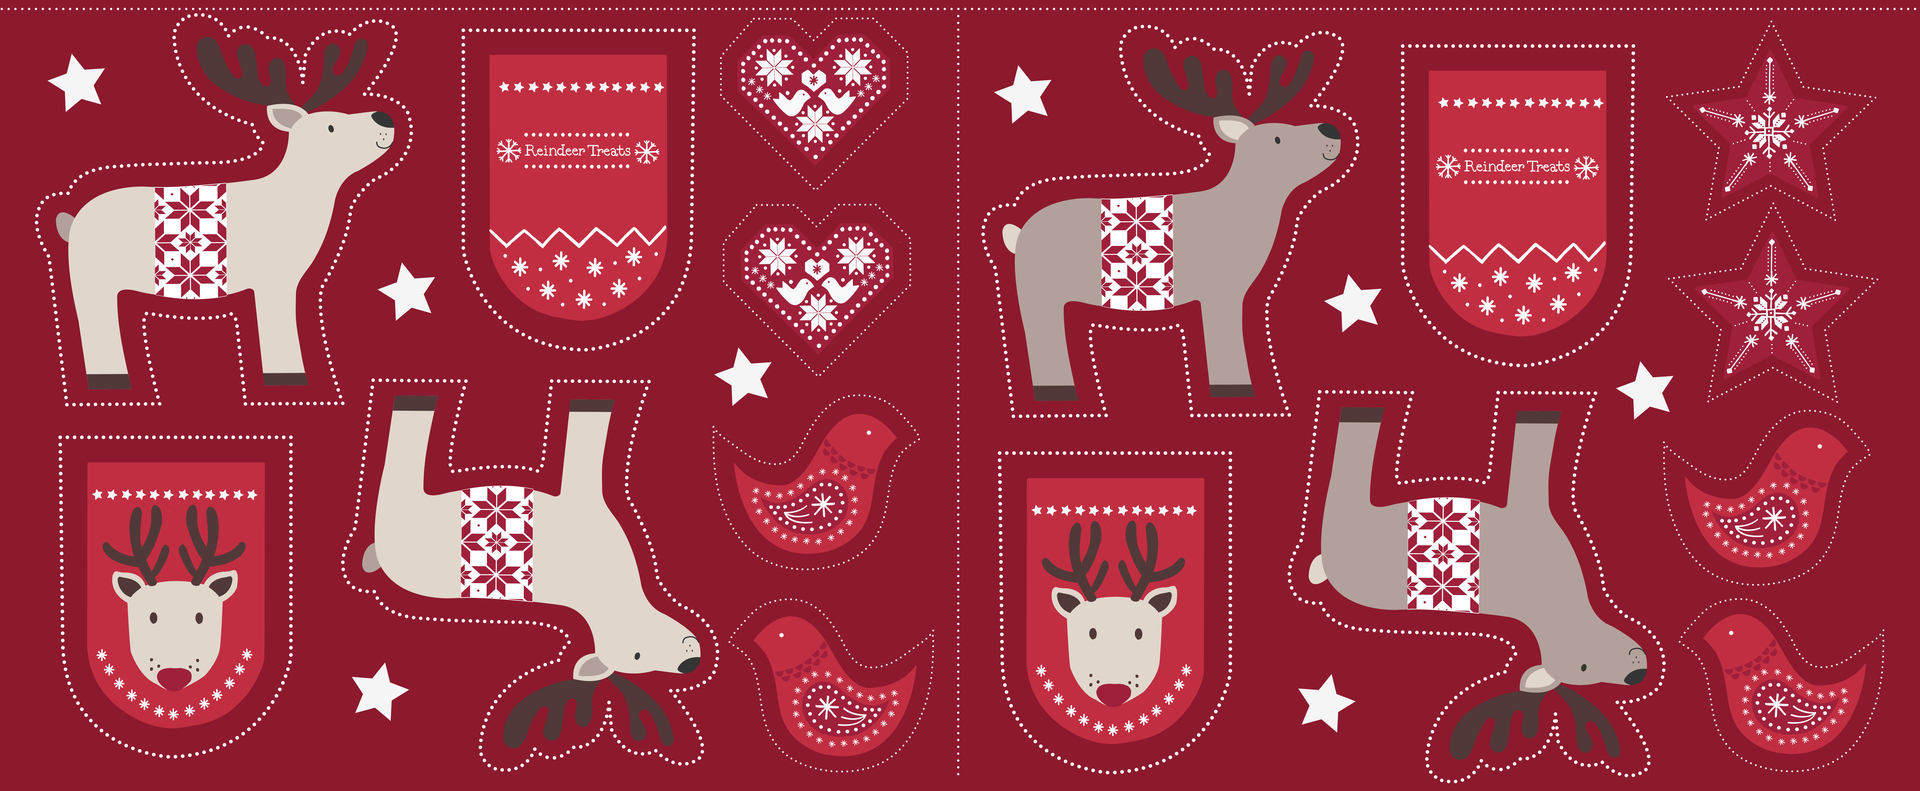 WIMSR- Cut MeOut Reindeer on red